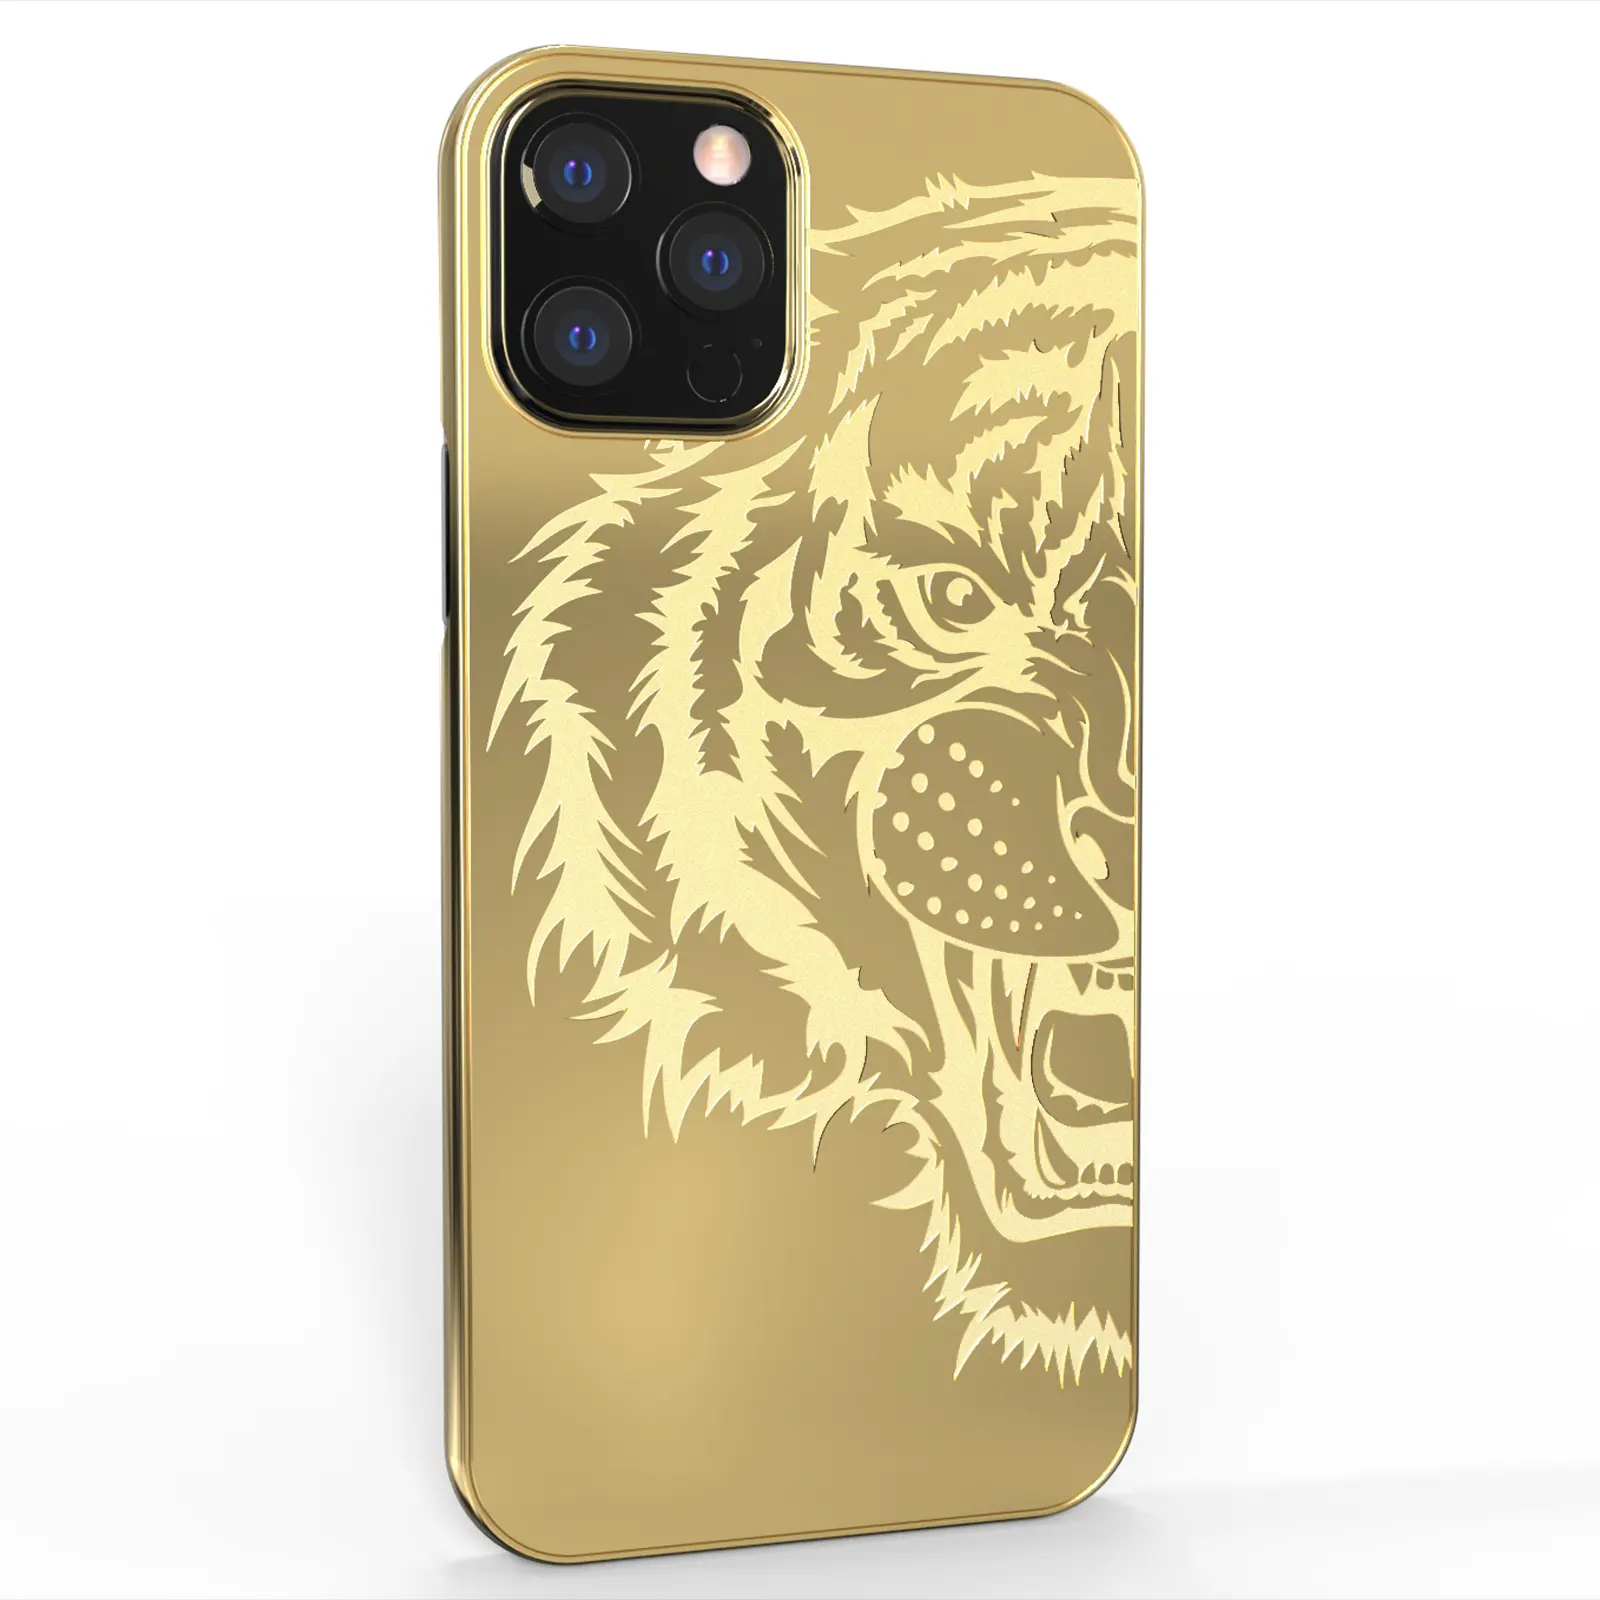 2021 Amazon Hot Sale Golden Back Cover Gold plated Case Sticker For Iphone 13 11 12 X XR Pro Max Mobile Phone Case